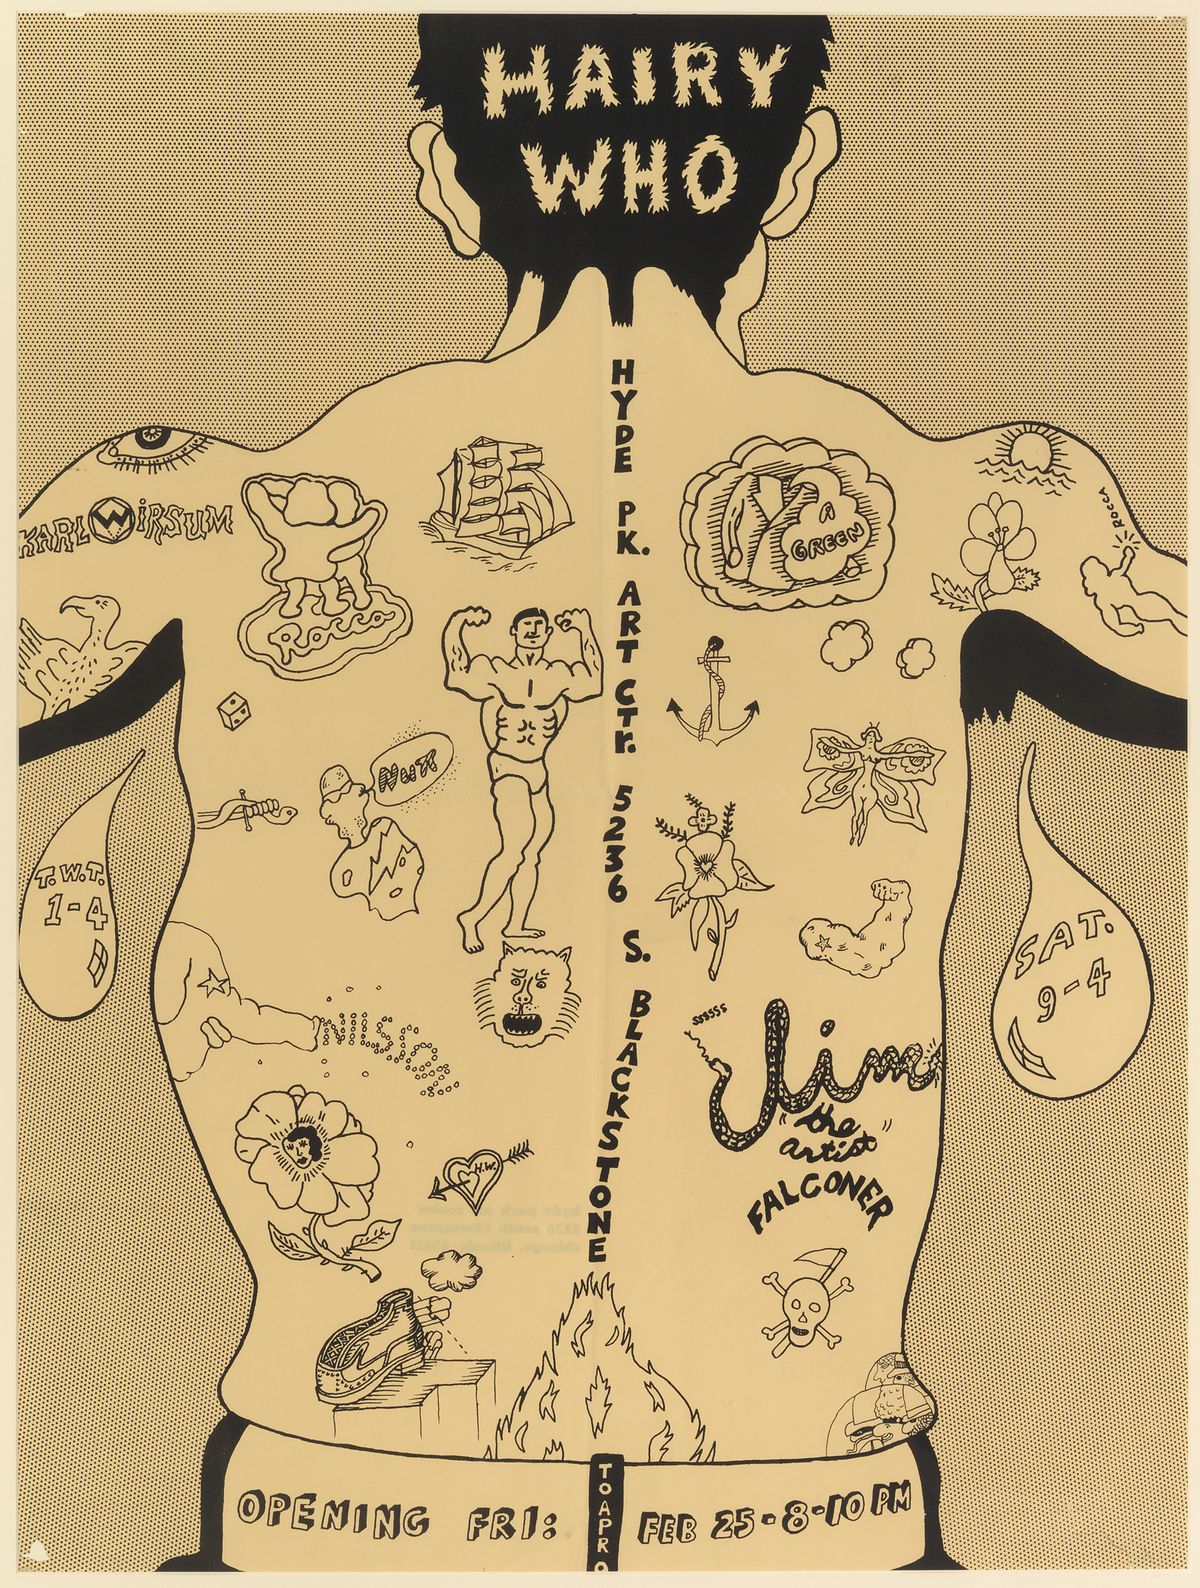 James Falconer, Art Green, Gladys Nilsson, Suellen Rocca, and Karl Wirsum, Poster for the first “Hairy Who” group exhibition at the Hyde Park Art Center, Chicago, Feb. 25–April 9, 1966. Offset lithograph commercially printed on buff wove paper, based on a